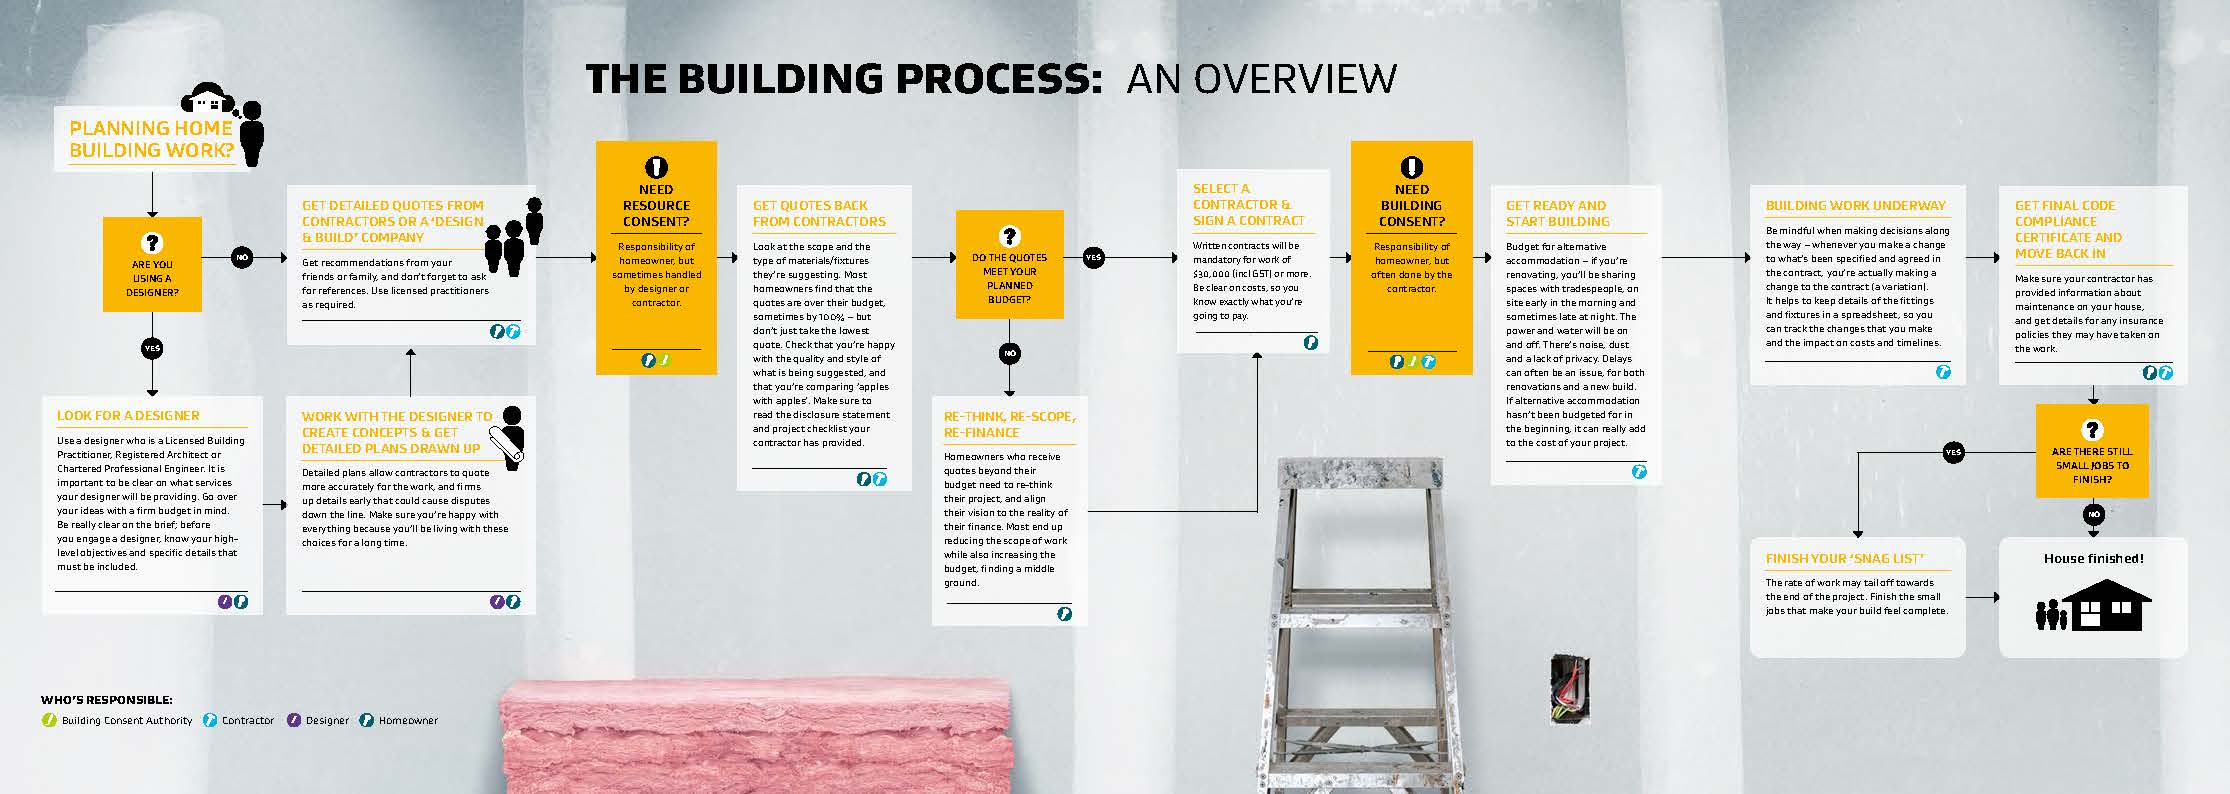 Overview of the building process